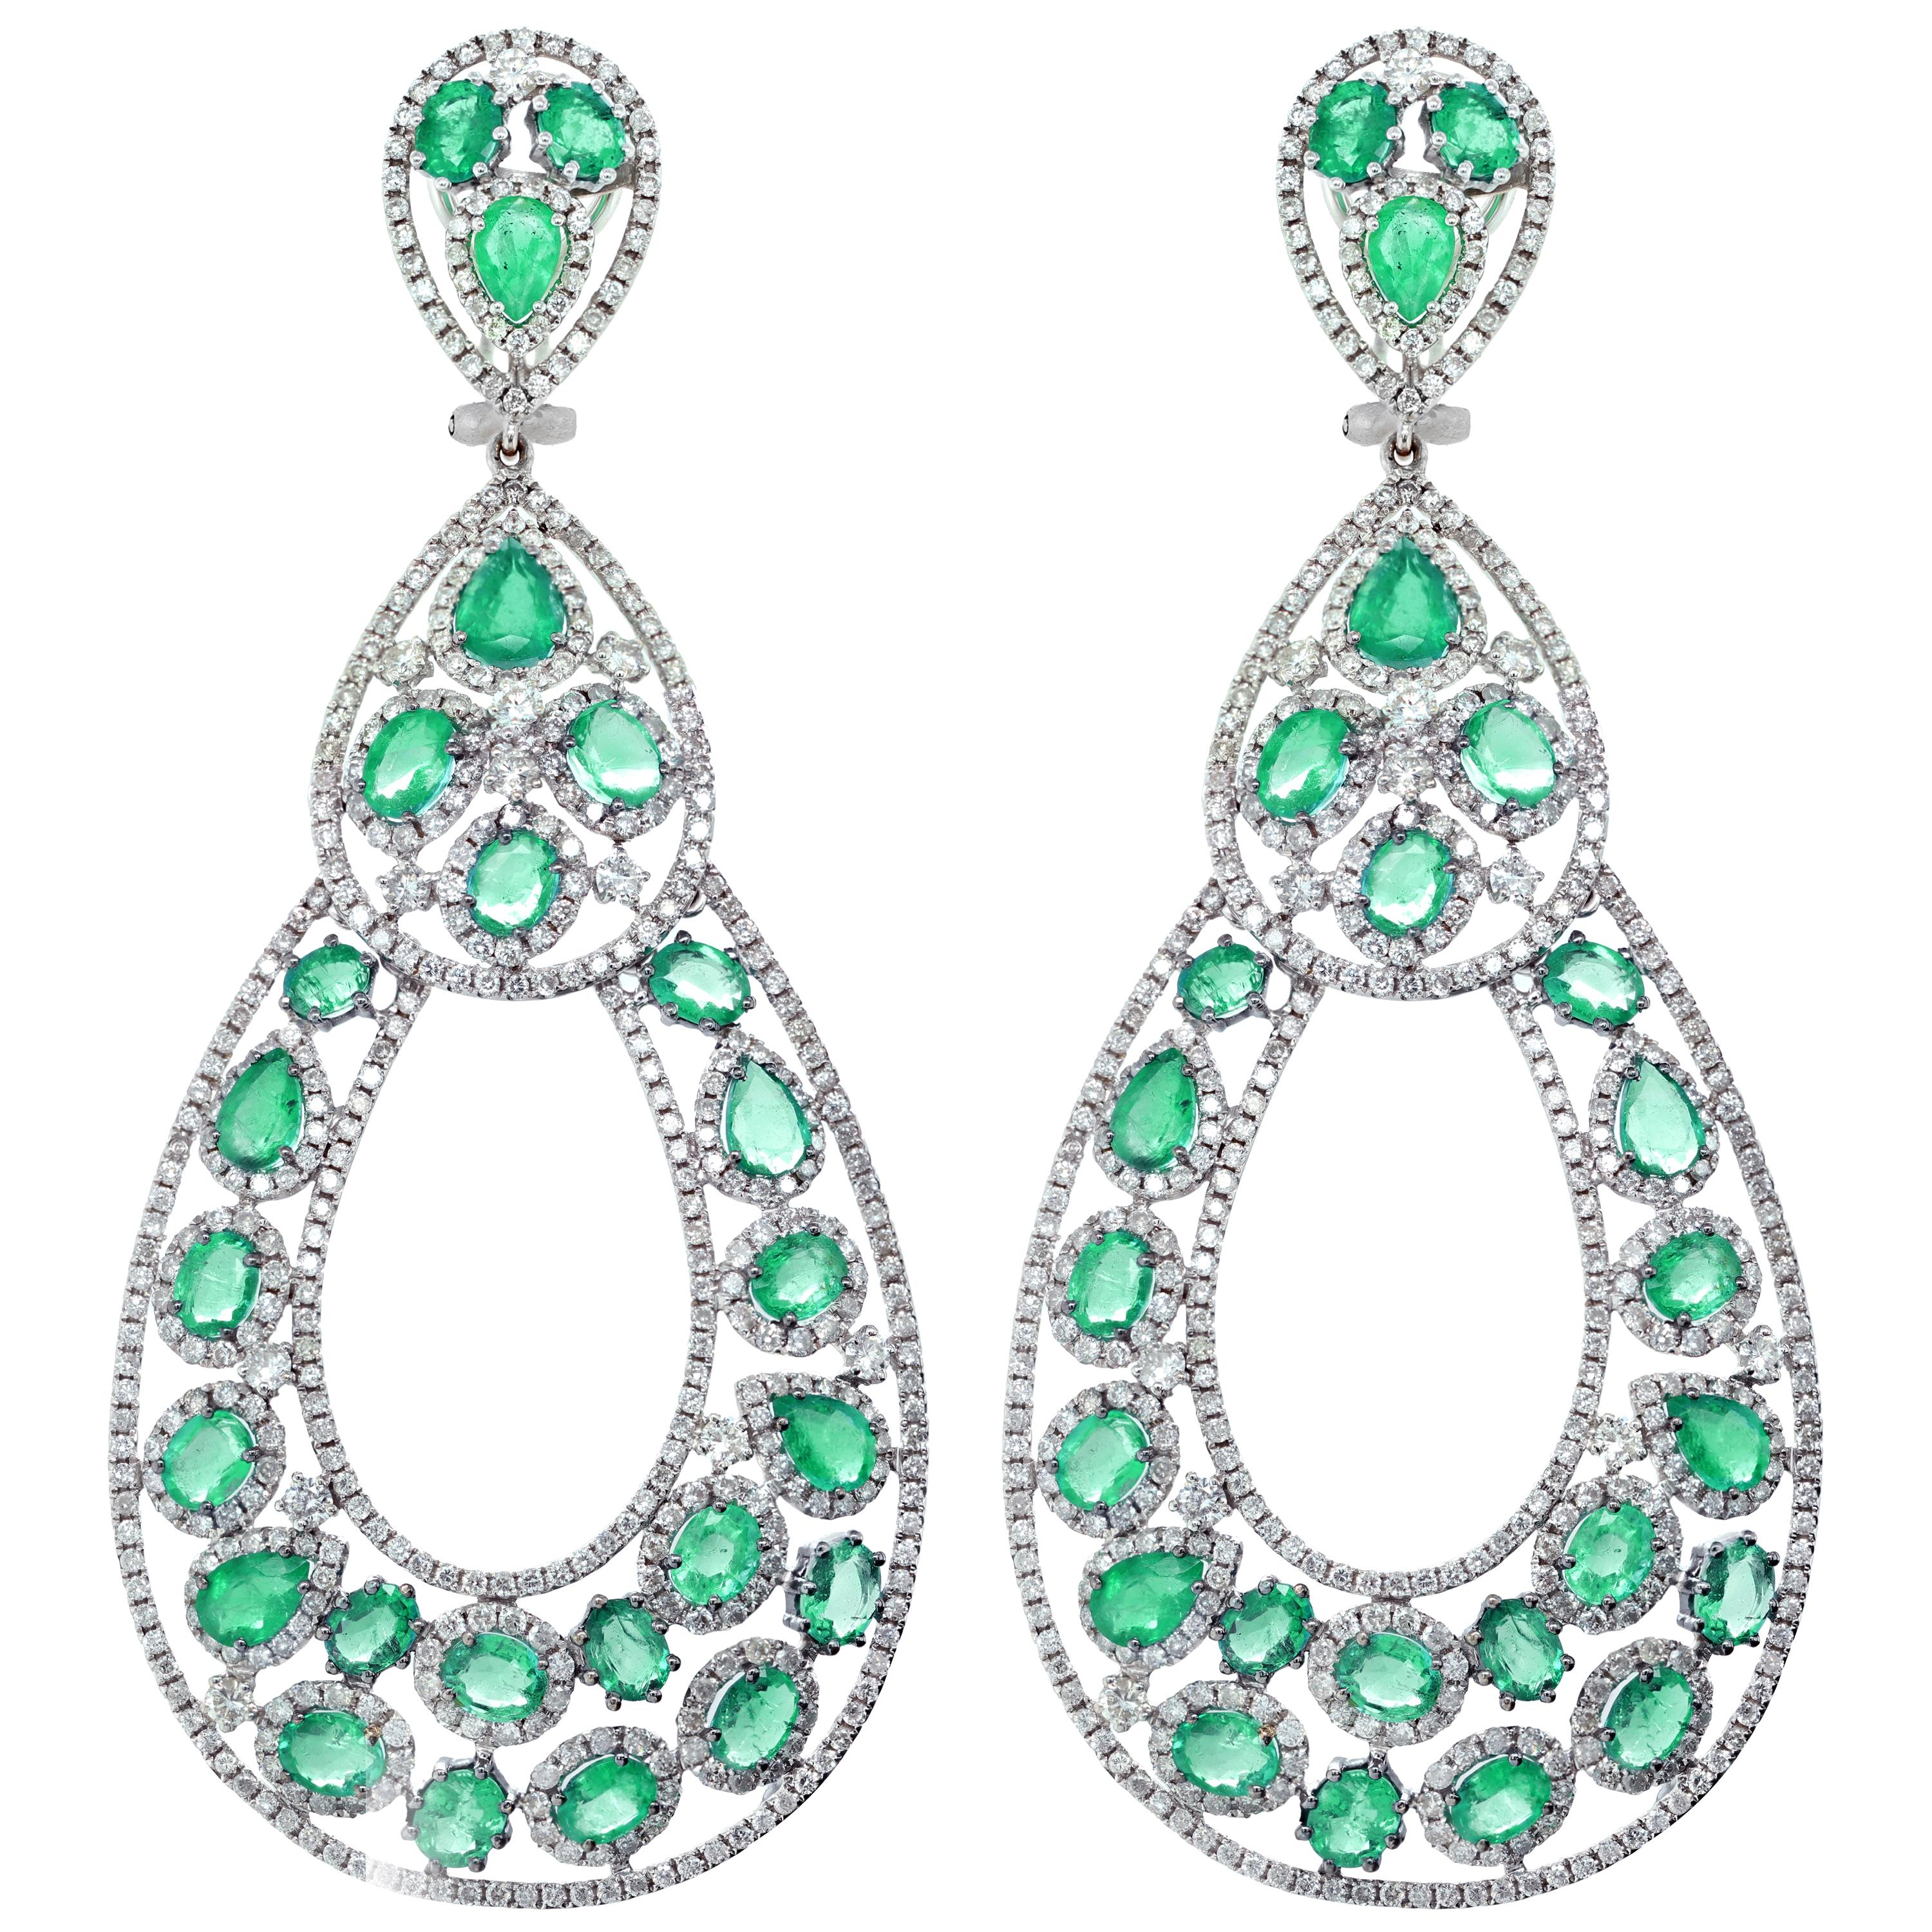 Diana M. Stunning Emerald and Diamond Earrings by Diana M.